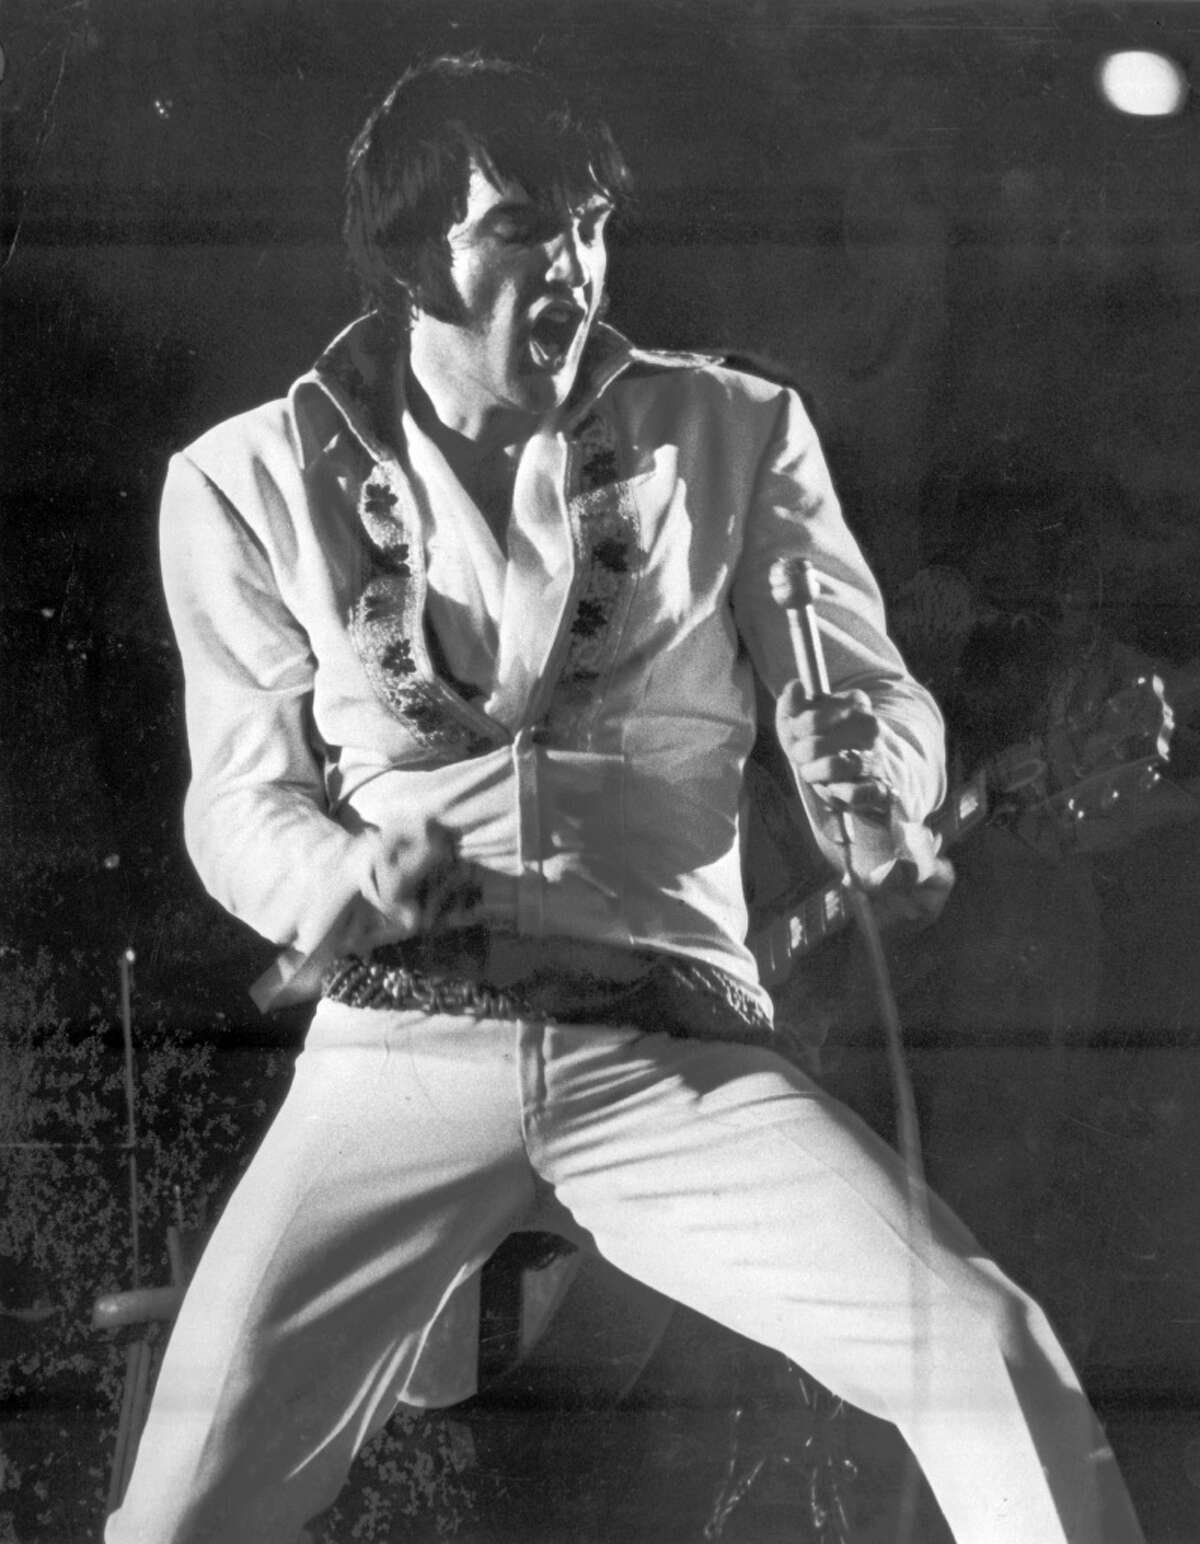 Double-Stuf Elvis By the '70s, he was no longer considered dangerous. Things were starting to go south, and he died in 1977 at the age of 42.